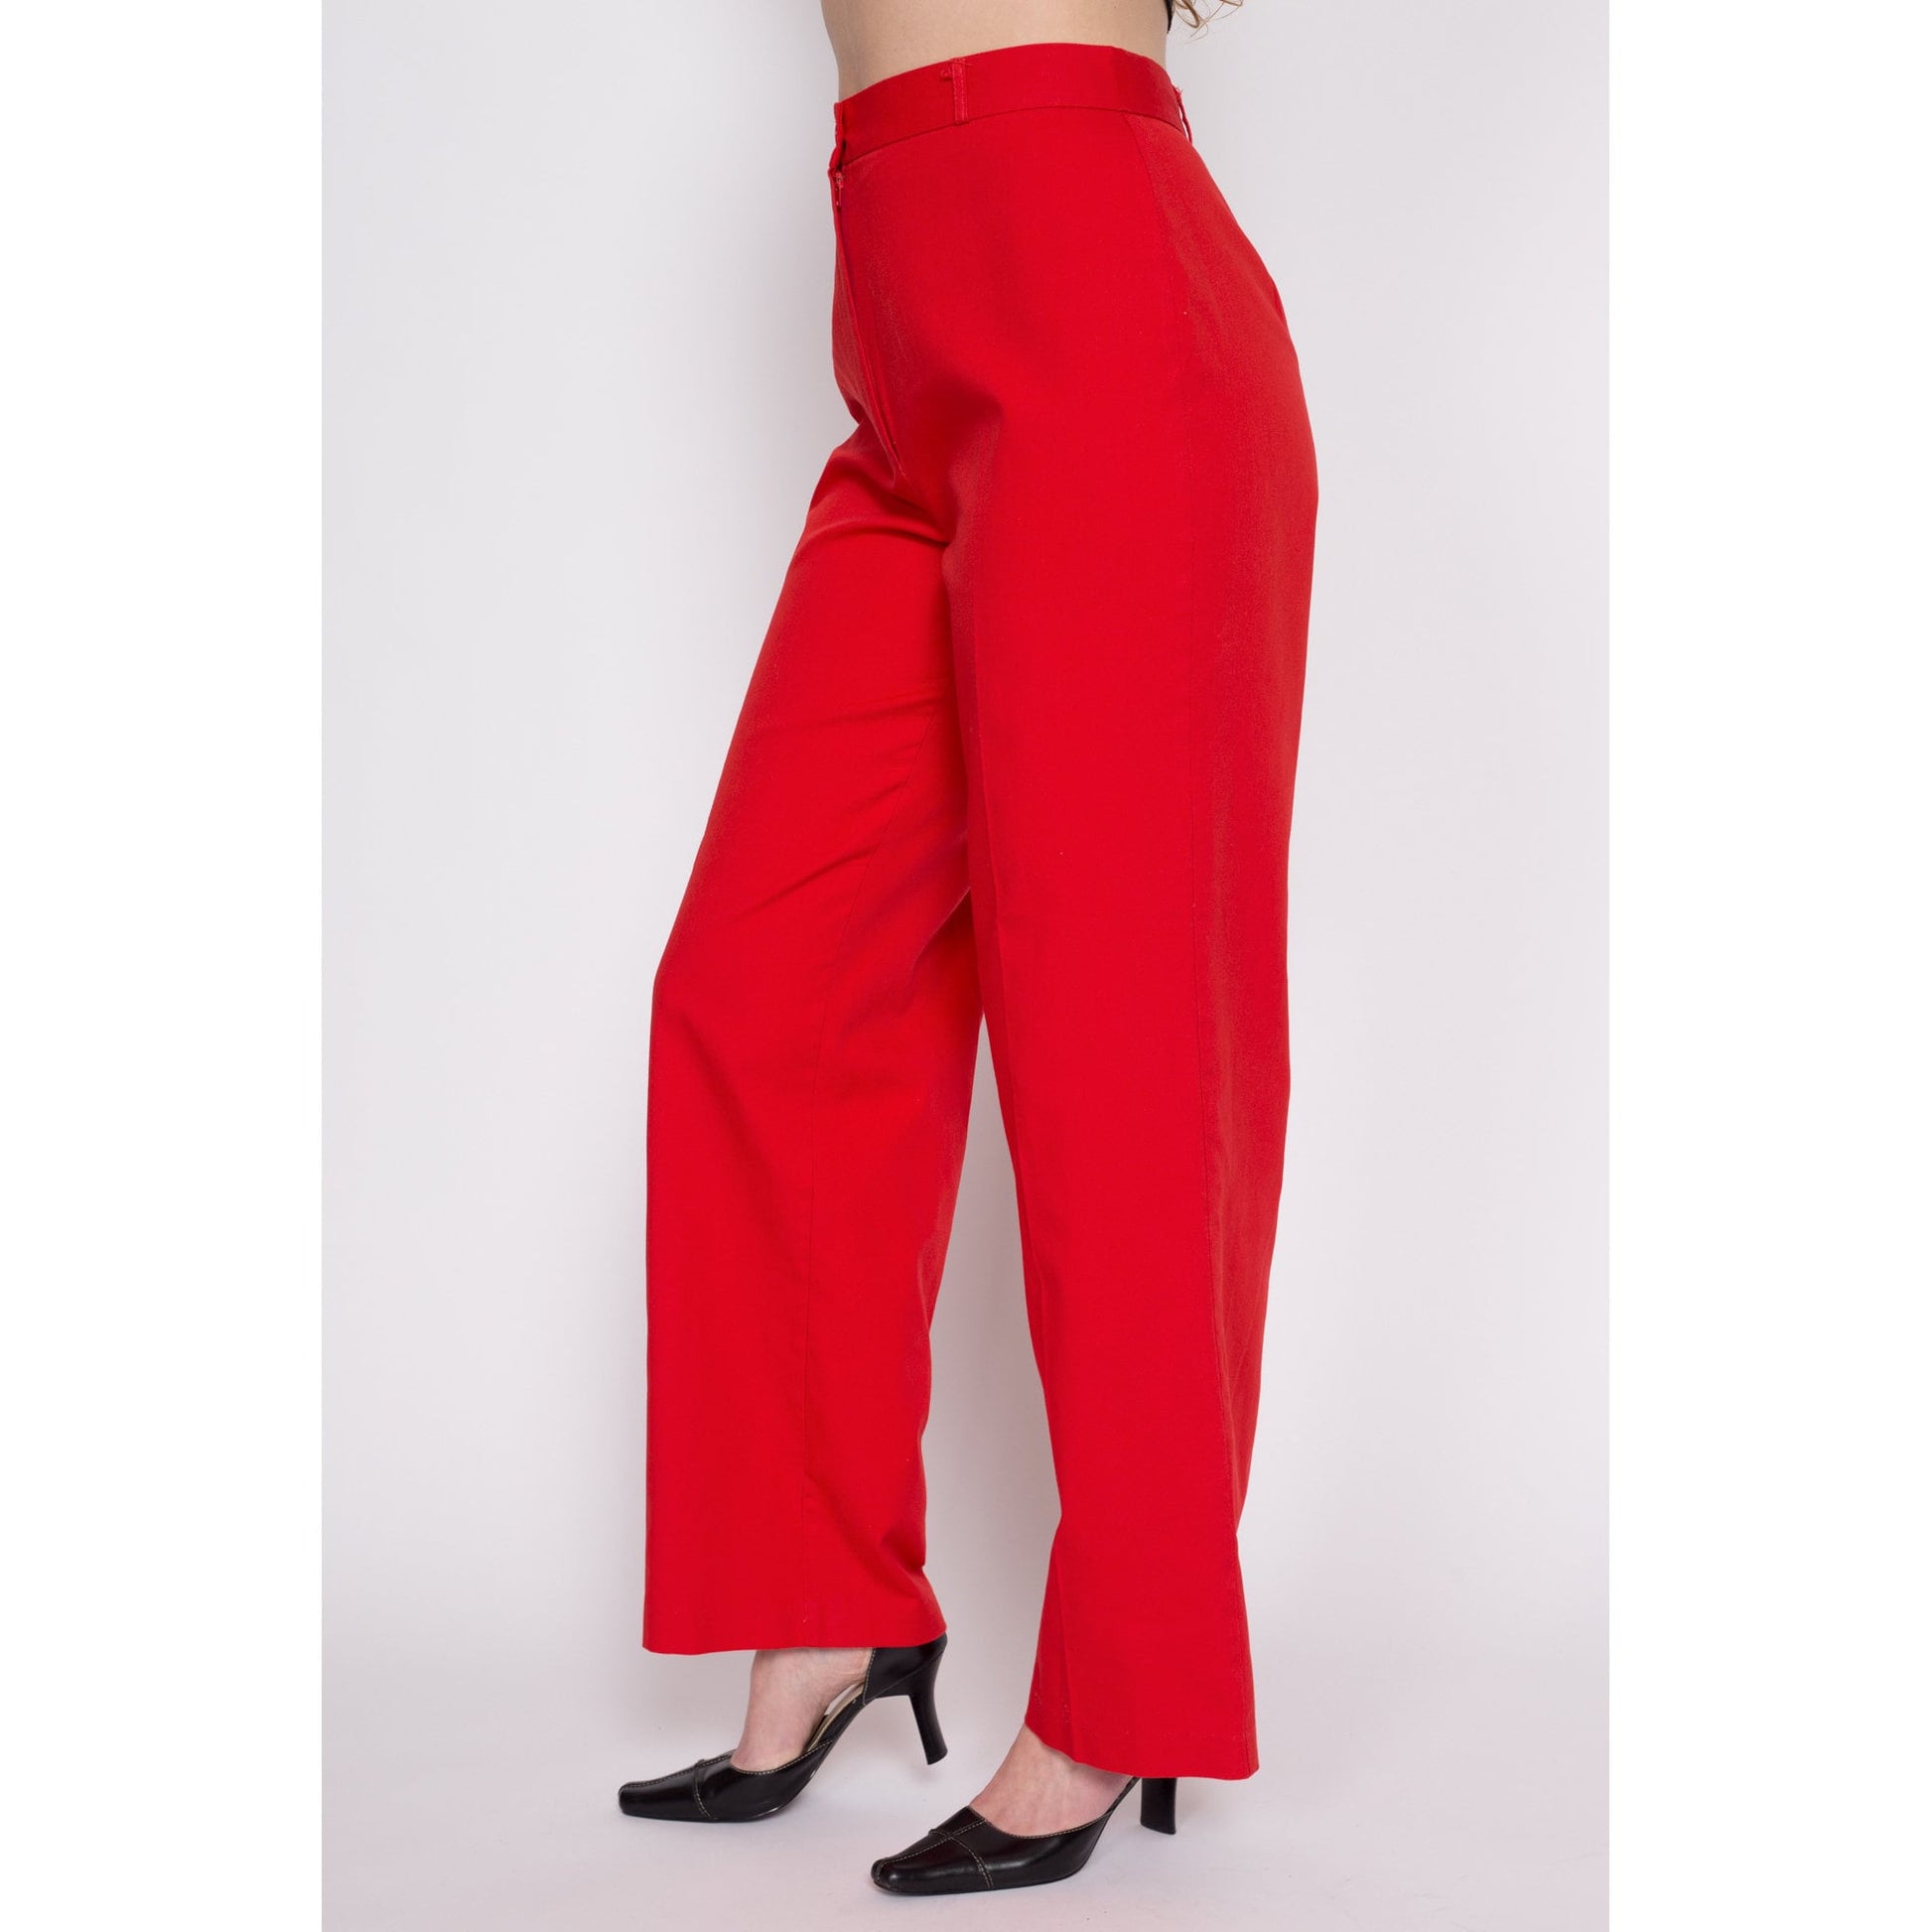 80s Red Pleated Pants Size S Made in FRANCE High Waisted Mom Pants